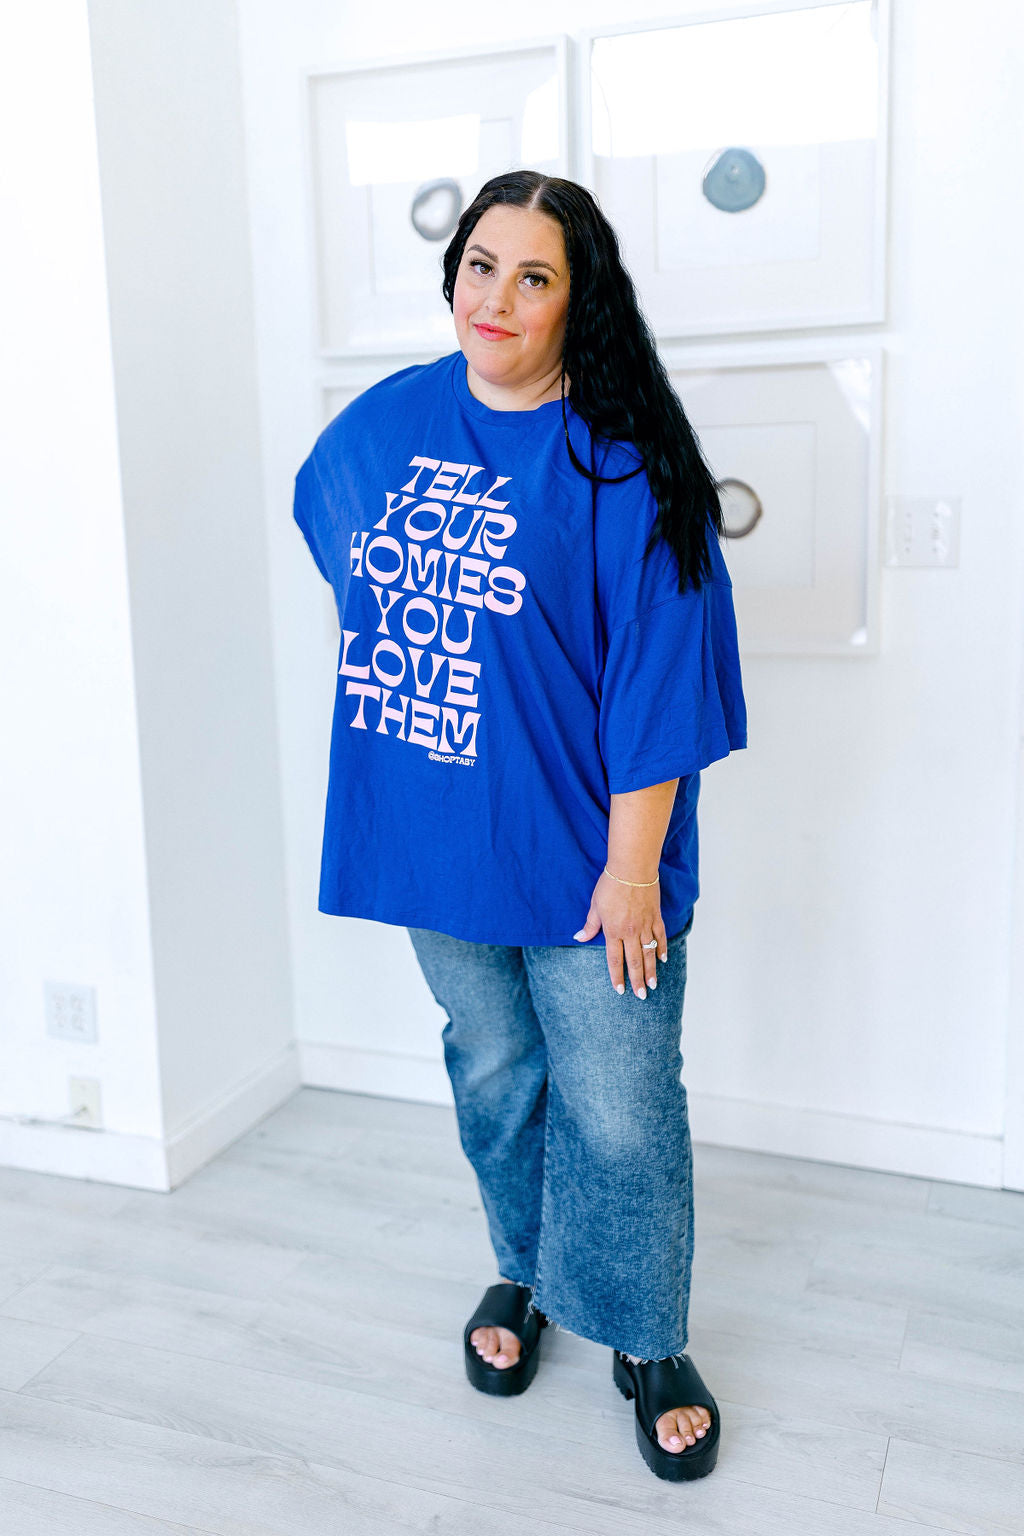 TABY ORIGINAL: Tell Your Homies You Love Them Boxy Tee In AZURE BLUE***